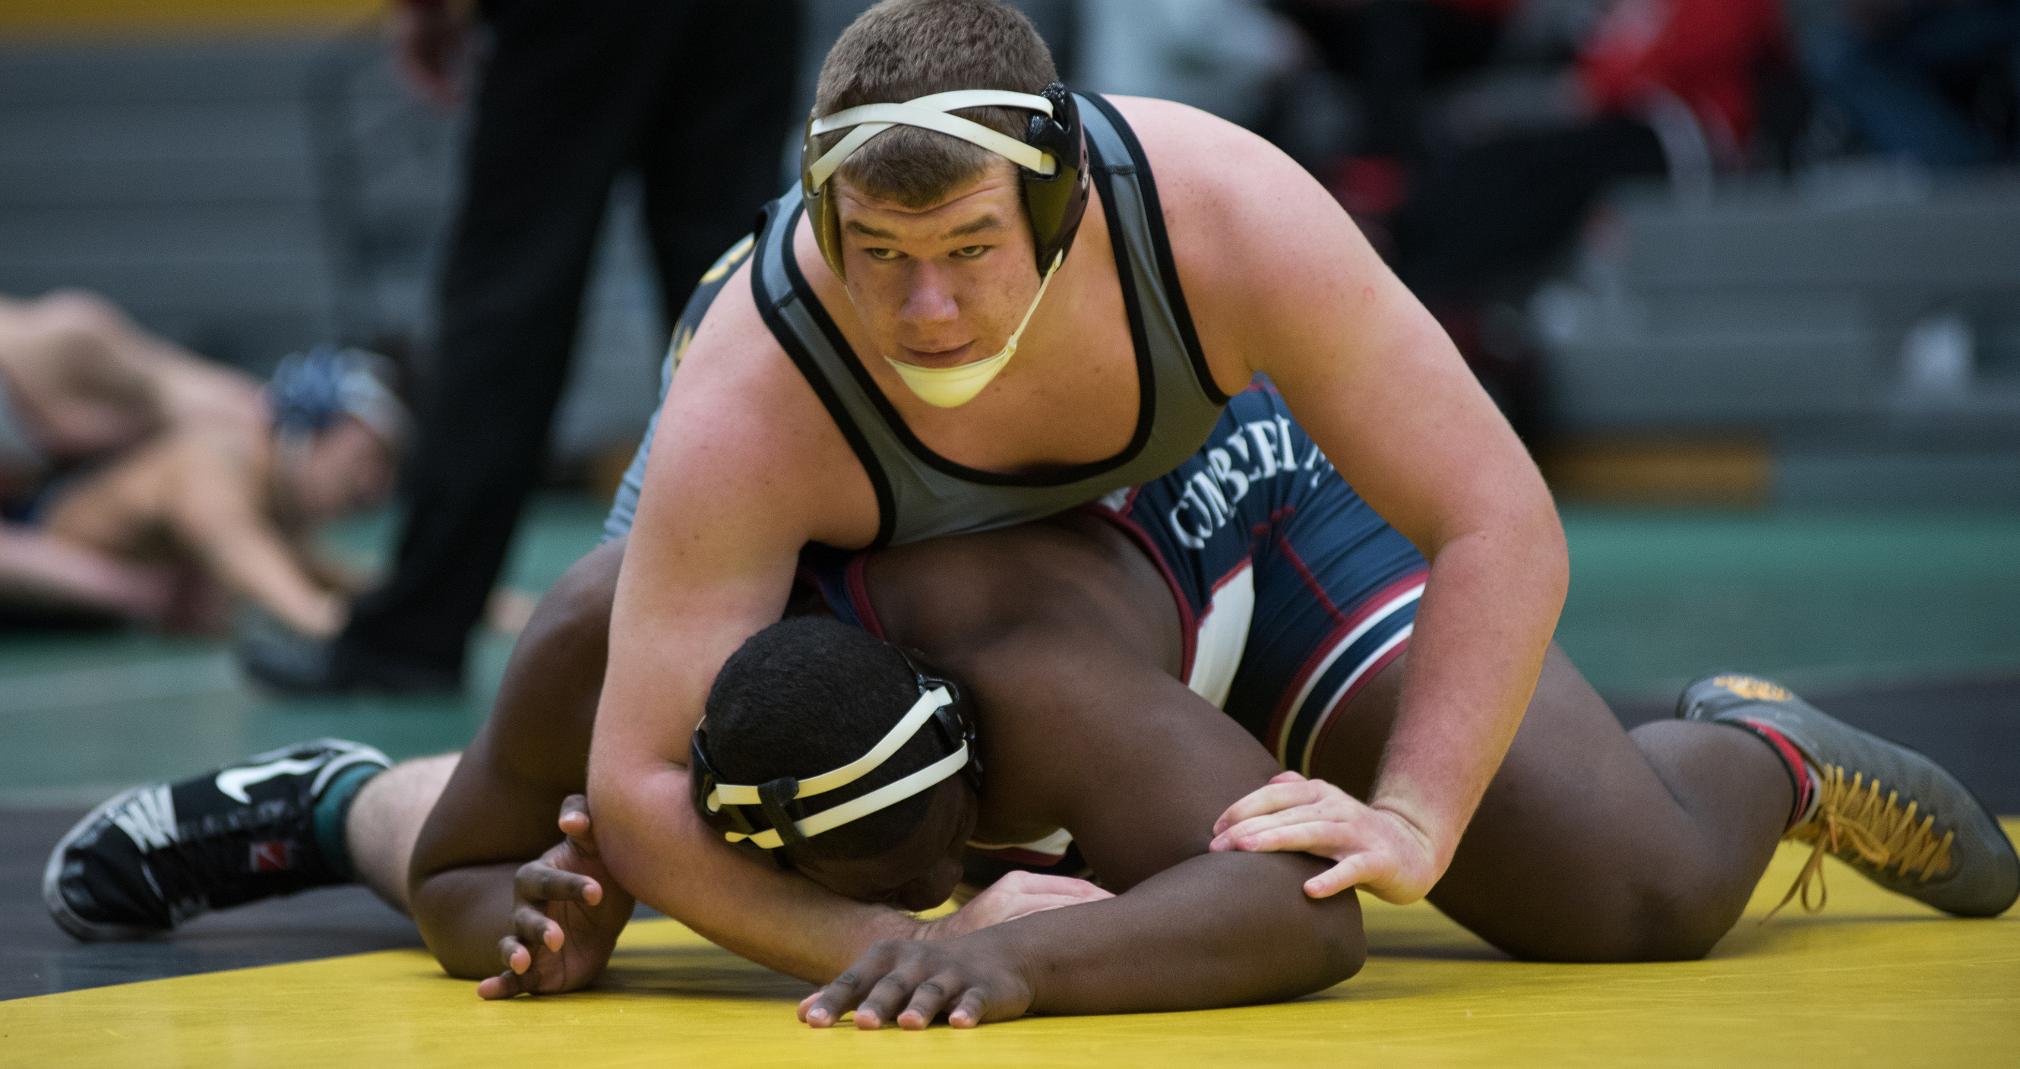 Elijah Burdick recorded his second pin of the season against the Warhawks